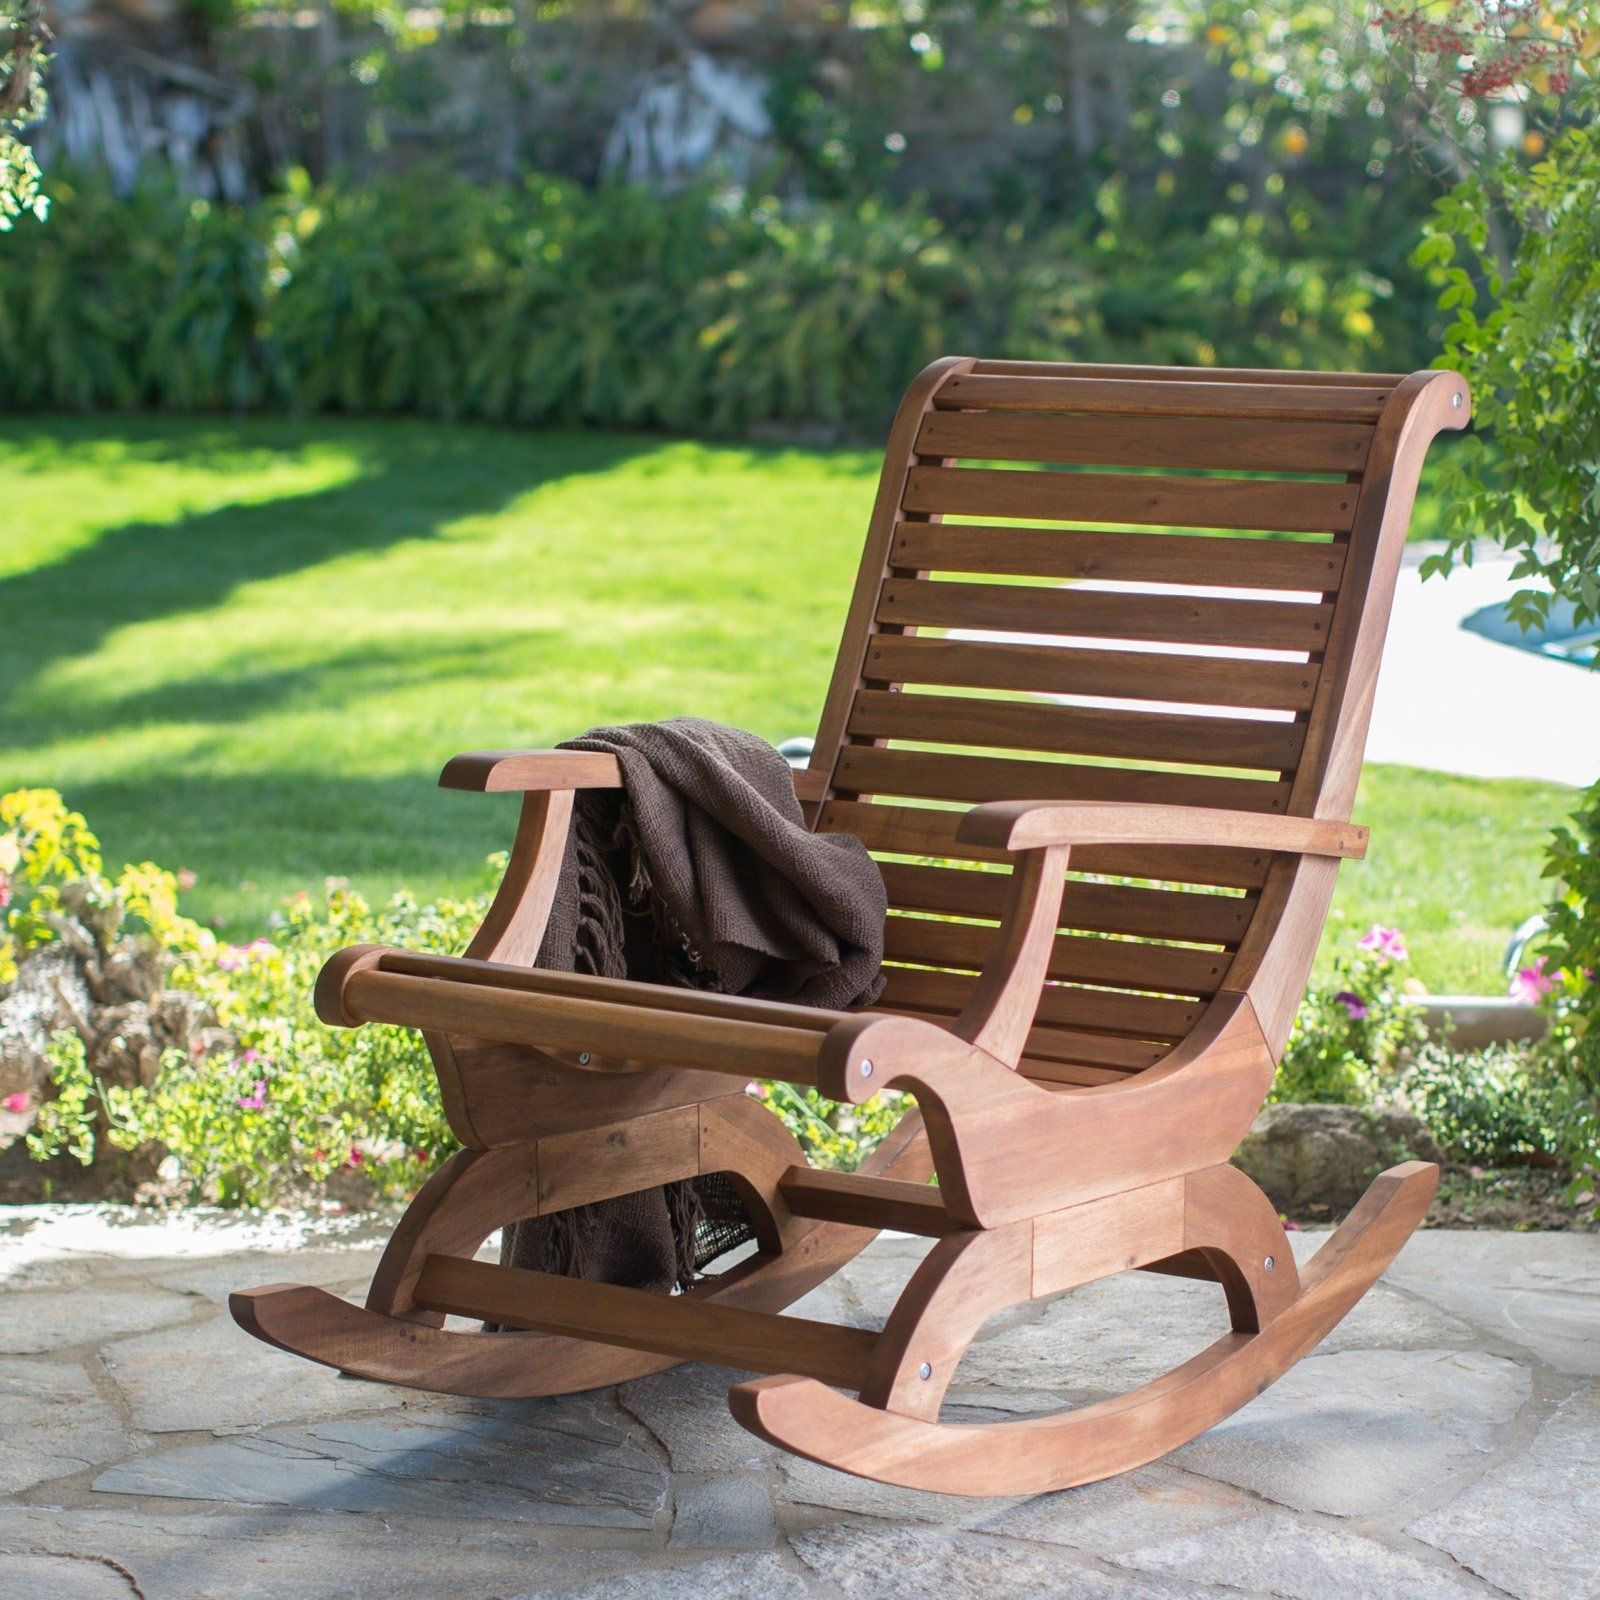 Belham Living Avondale Oversized Outdoor Rocking Chair – Natural Intended For Well Known Outdoor Rocking Chairs (View 1 of 20)